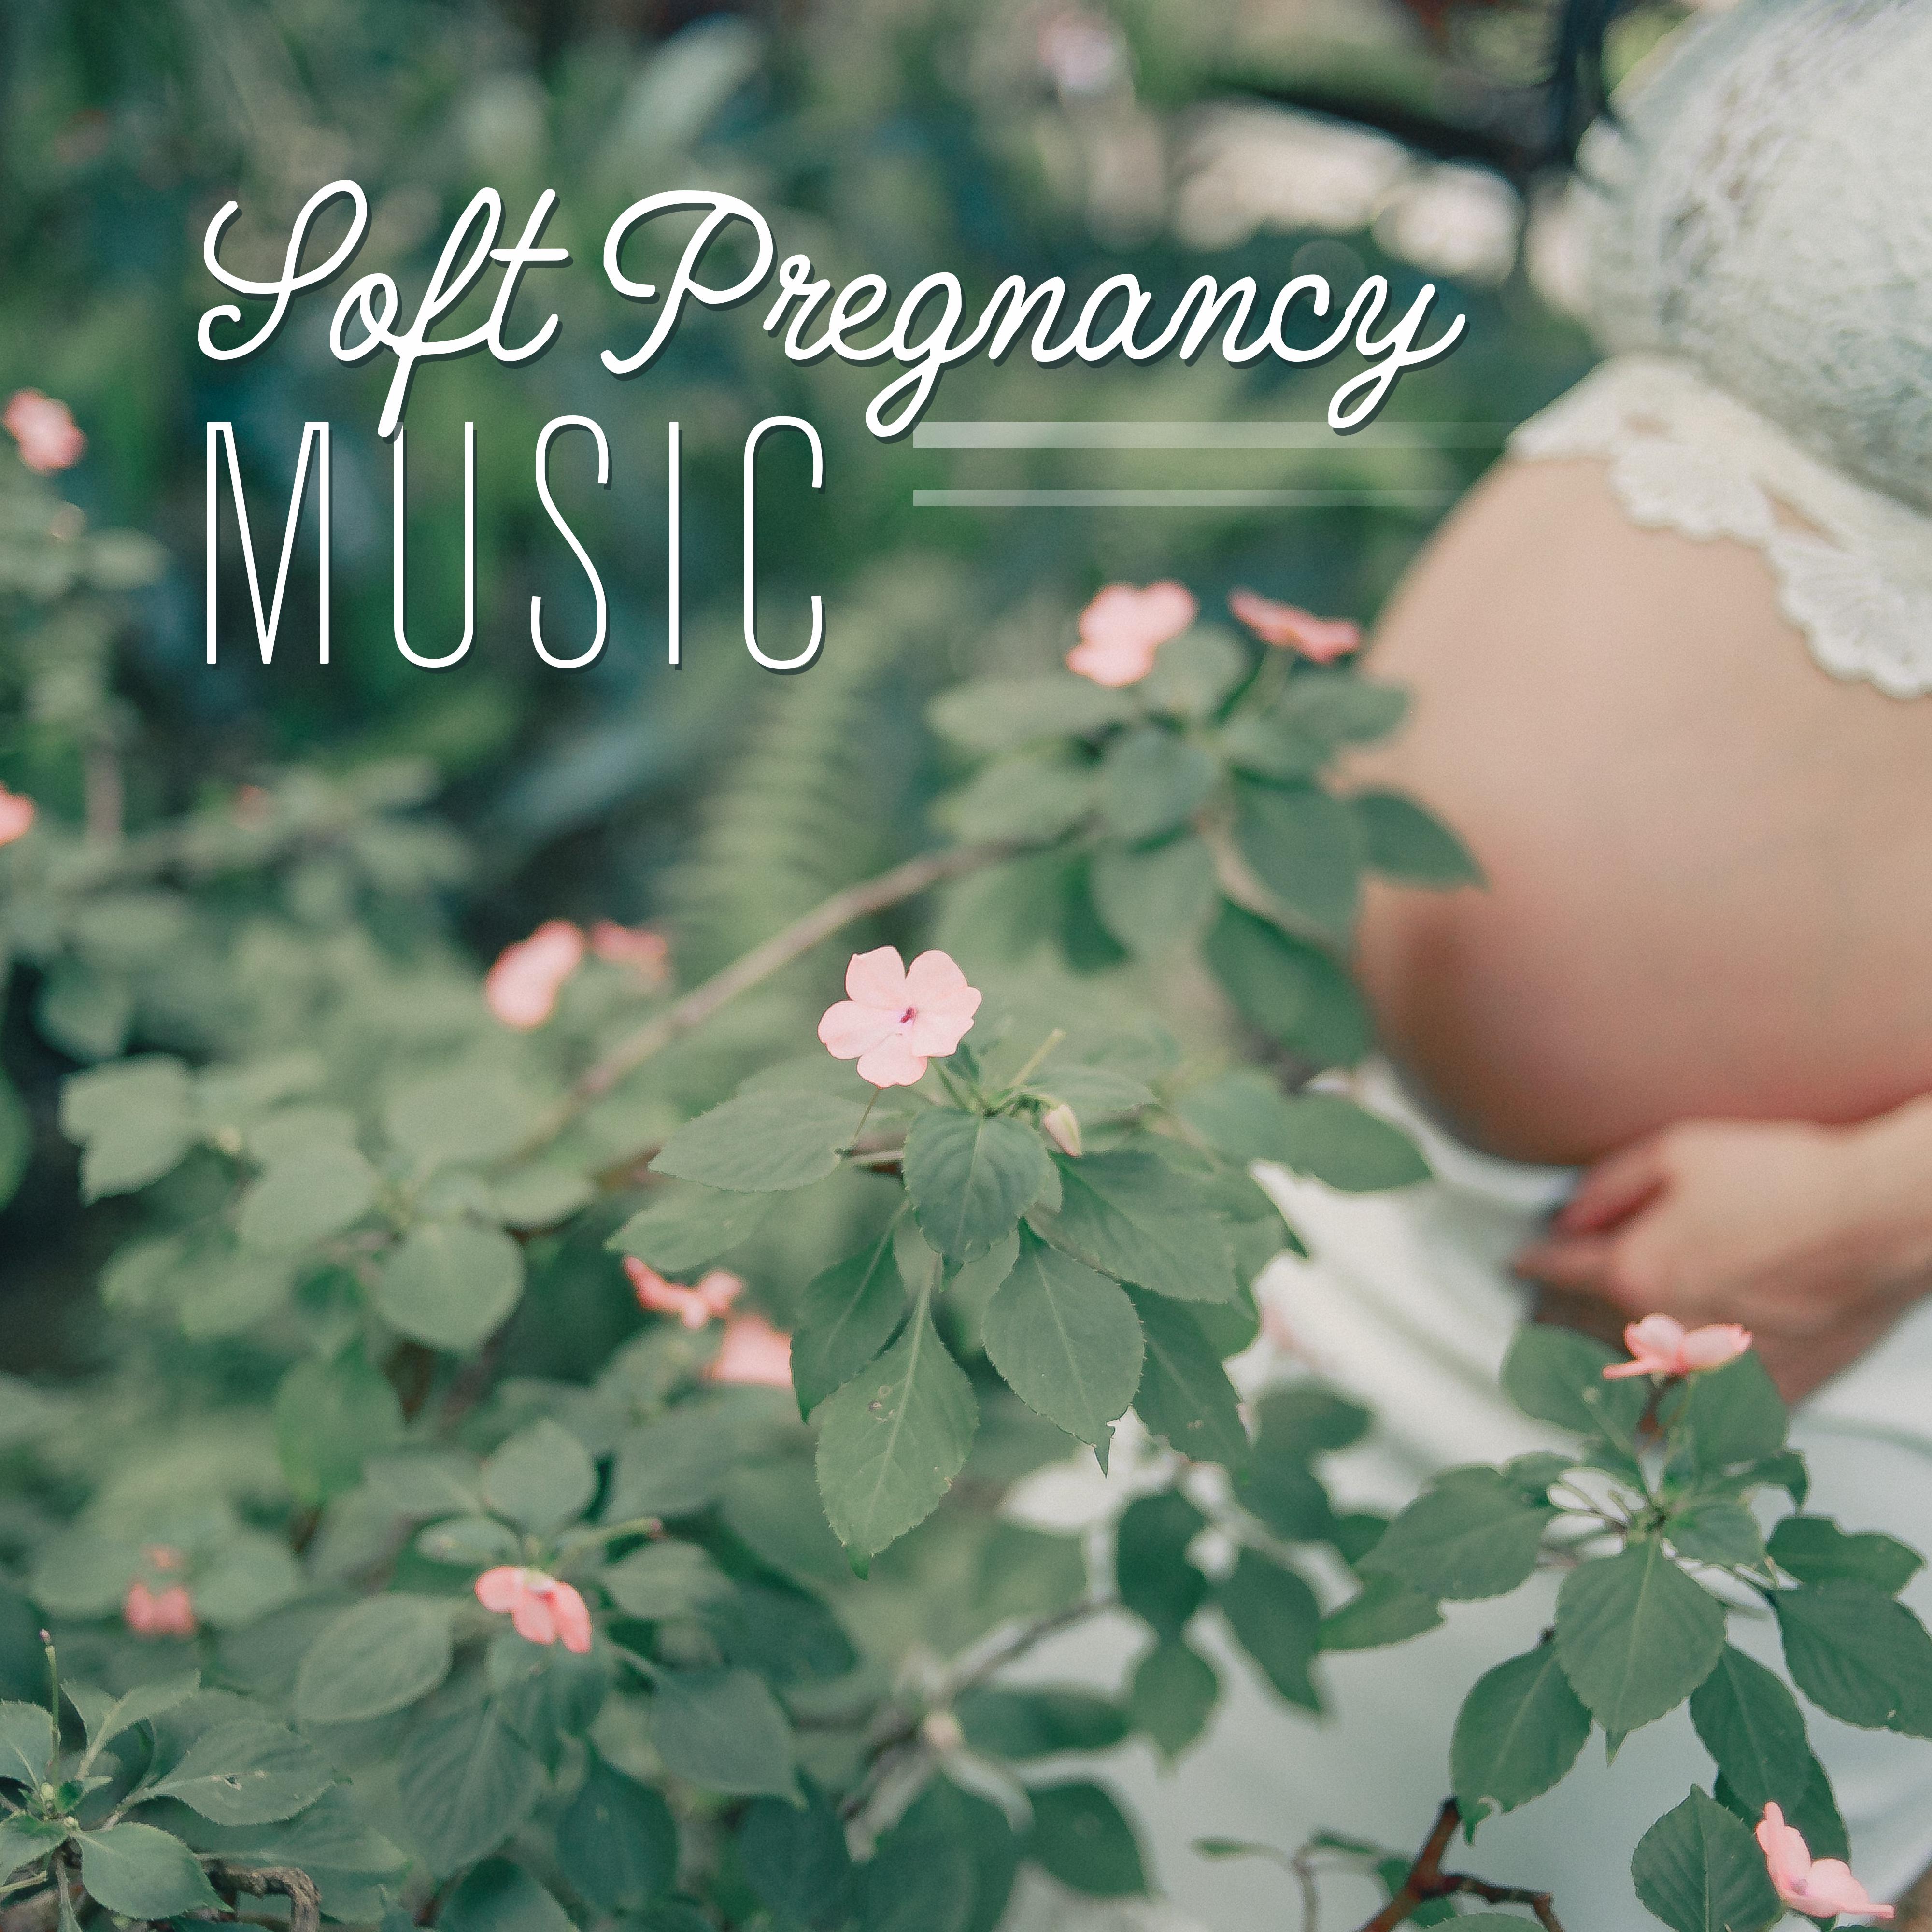 Soft Pregnancy Music: Relaxing Sounds for Pregnant Woman and Baby, Calm Sleep, Pure Relaxation, Zen, Lounge, Healing Music to Calm Down